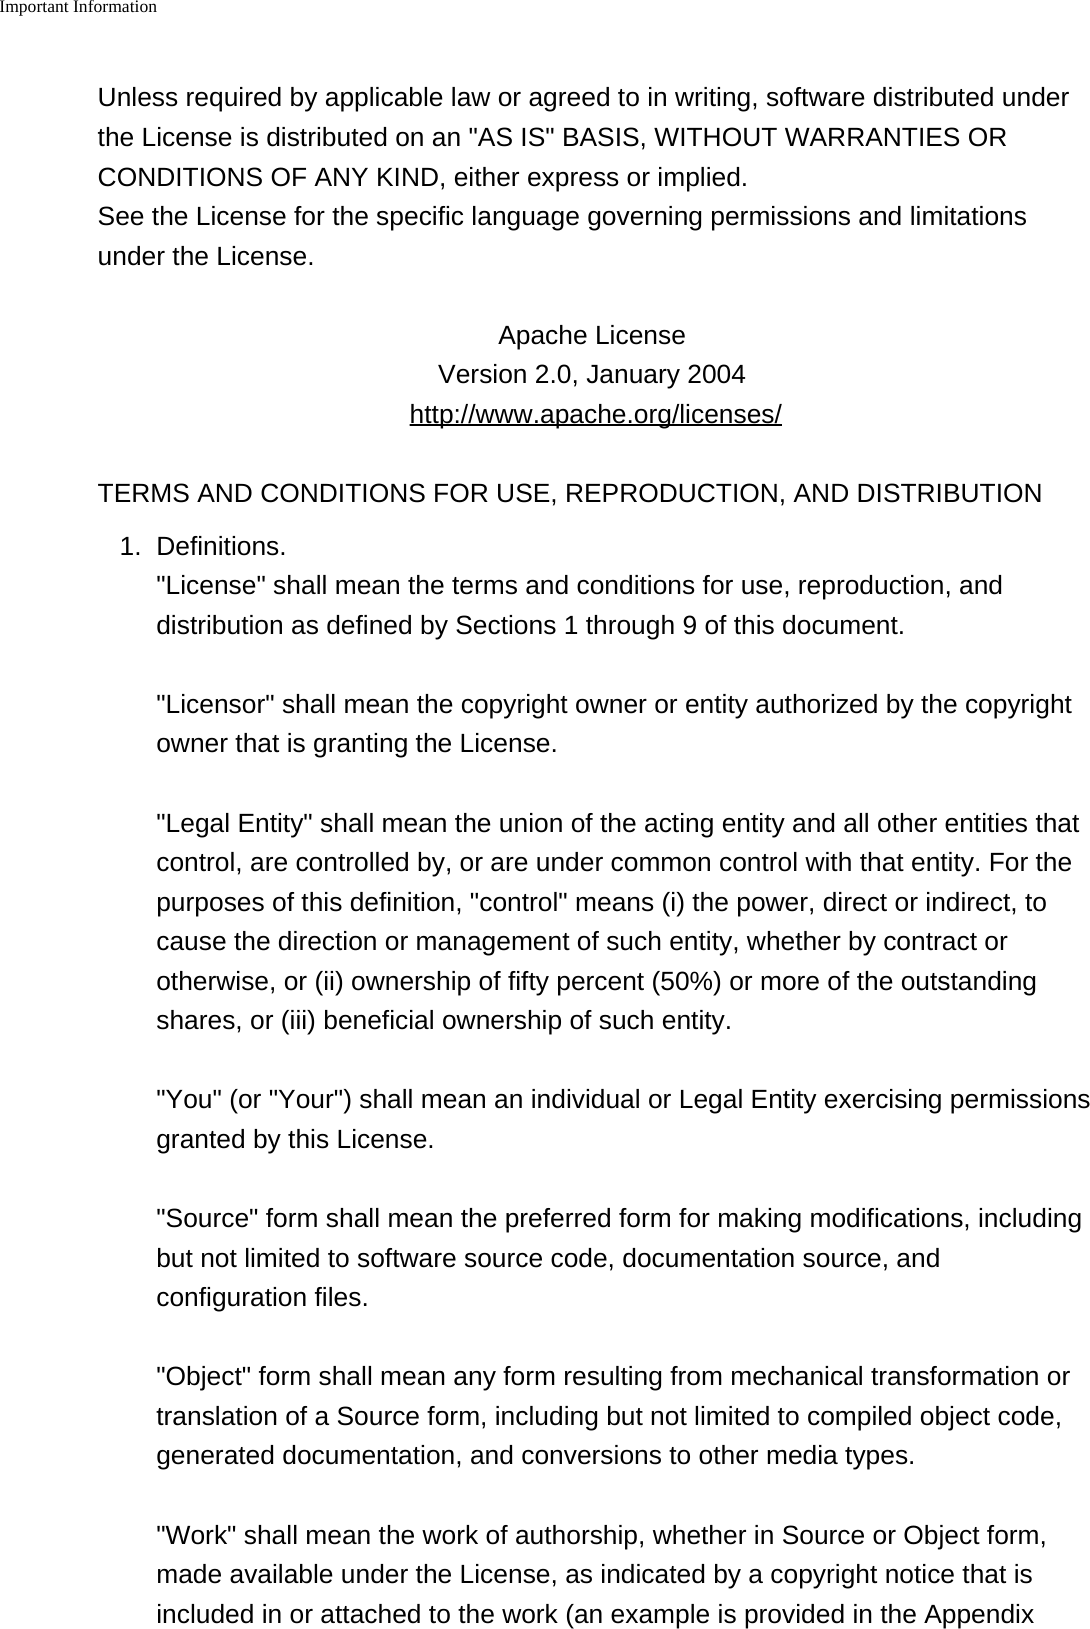 Important Information    Unless required by applicable law or agreed to in writing, software distributed underthe License is distributed on an &quot;AS IS&quot; BASIS, WITHOUT WARRANTIES ORCONDITIONS OF ANY KIND, either express or implied. See the License for the specific language governing permissions and limitationsunder the License.Apache License Version 2.0, January 2004 http://www.apache.org/licenses/TERMS AND CONDITIONS FOR USE, REPRODUCTION, AND DISTRIBUTION1. Definitions.&quot;License&quot; shall mean the terms and conditions for use, reproduction, anddistribution as defined by Sections 1 through 9 of this document.&quot;Licensor&quot; shall mean the copyright owner or entity authorized by the copyrightowner that is granting the License.&quot;Legal Entity&quot; shall mean the union of the acting entity and all other entities thatcontrol, are controlled by, or are under common control with that entity. For thepurposes of this definition, &quot;control&quot; means (i) the power, direct or indirect, tocause the direction or management of such entity, whether by contract orotherwise, or (ii) ownership of fifty percent (50%) or more of the outstandingshares, or (iii) beneficial ownership of such entity.&quot;You&quot; (or &quot;Your&quot;) shall mean an individual or Legal Entity exercising permissionsgranted by this License.&quot;Source&quot; form shall mean the preferred form for making modifications, includingbut not limited to software source code, documentation source, andconfiguration files.&quot;Object&quot; form shall mean any form resulting from mechanical transformation ortranslation of a Source form, including but not limited to compiled object code,generated documentation, and conversions to other media types.&quot;Work&quot; shall mean the work of authorship, whether in Source or Object form,made available under the License, as indicated by a copyright notice that isincluded in or attached to the work (an example is provided in the Appendix